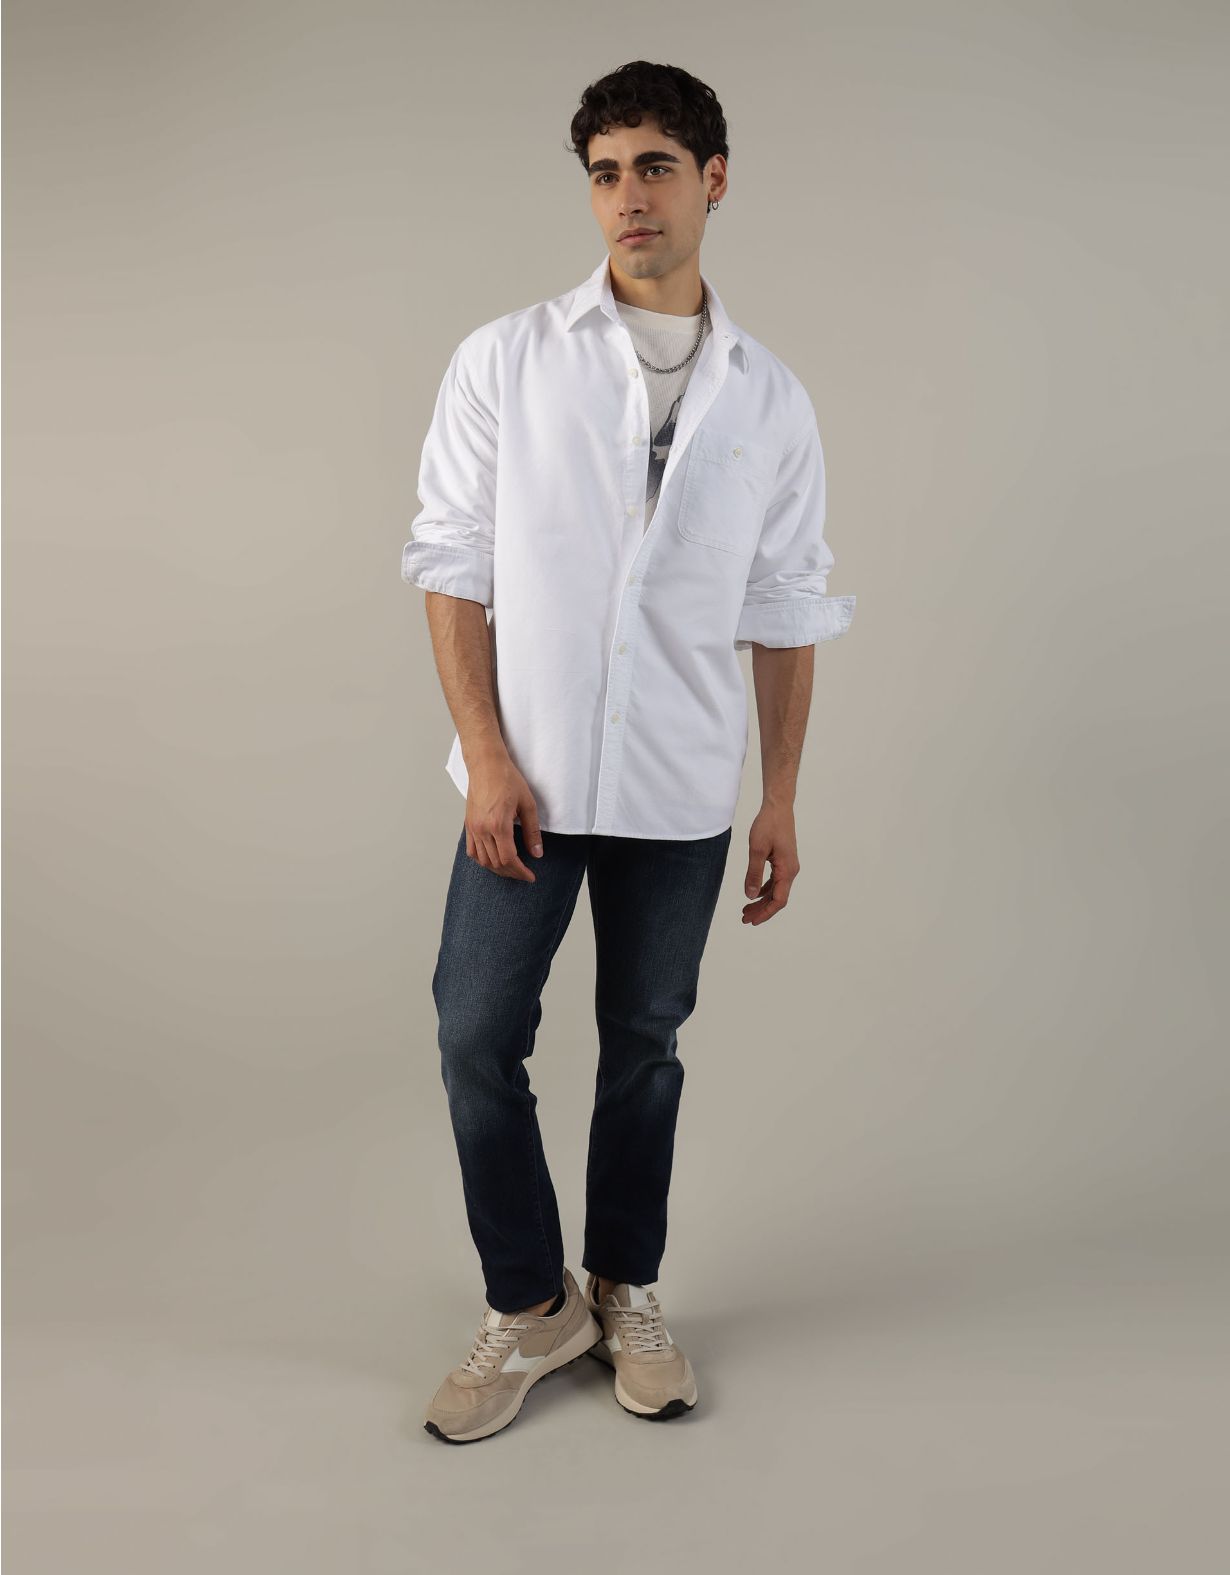 AE Oversized Button-Up Oxford Shirt